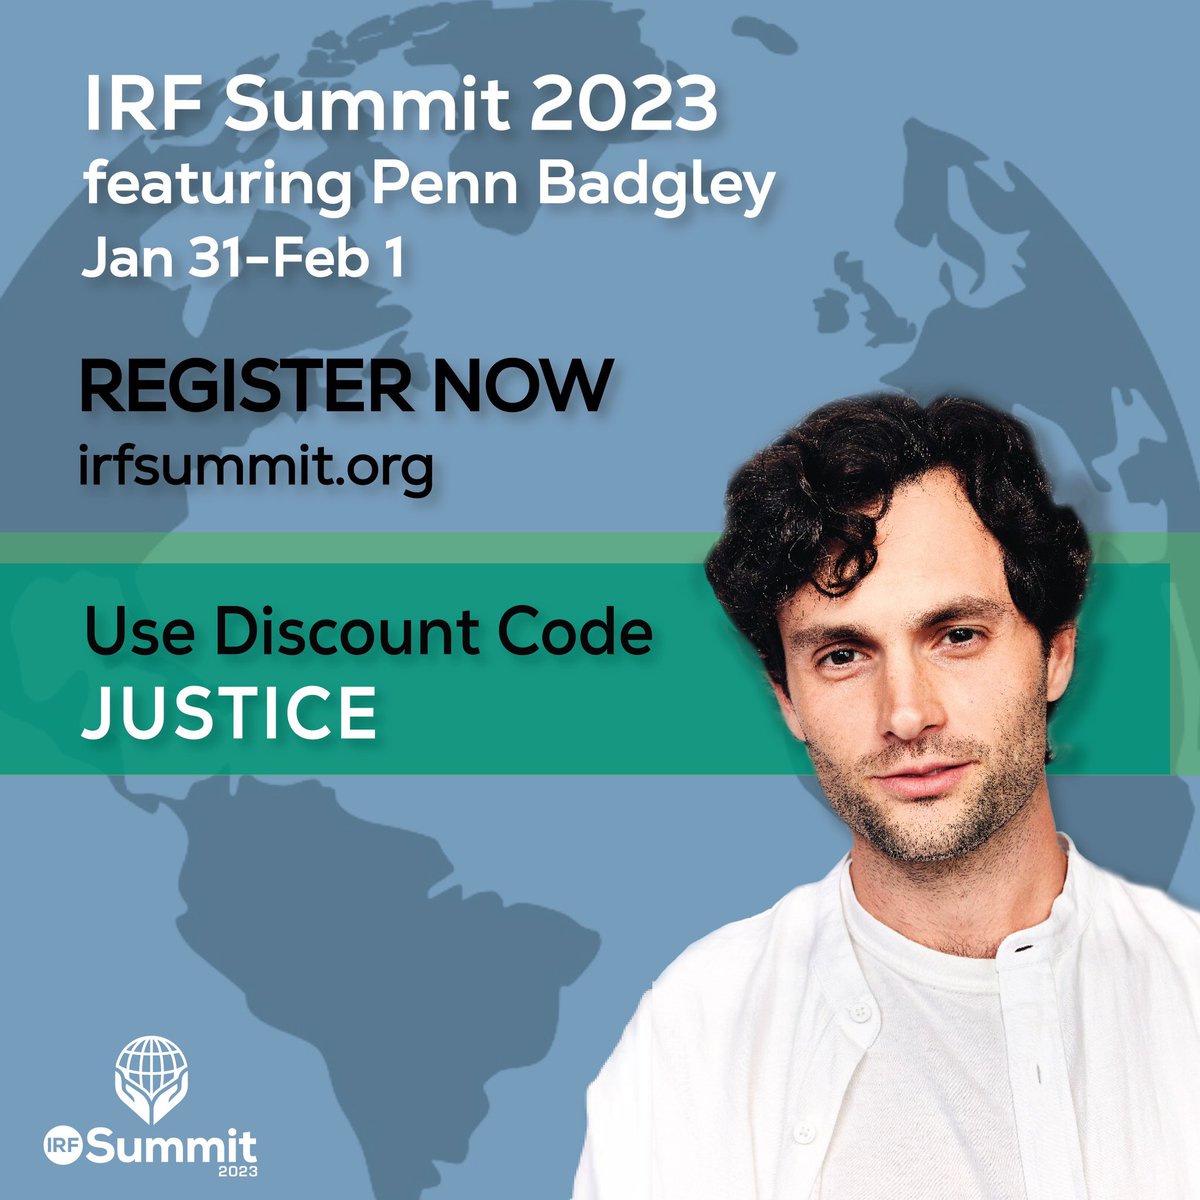 Unfettered individual investigation of truth is at the core of freedom of religion or belief. I'll be promoting that principle at the civil society summit for international religious freedom. Join me in D.C. on Jan. 31 & Feb. 1. #IRFSummit2023 irfsummit.org @IRFSummit